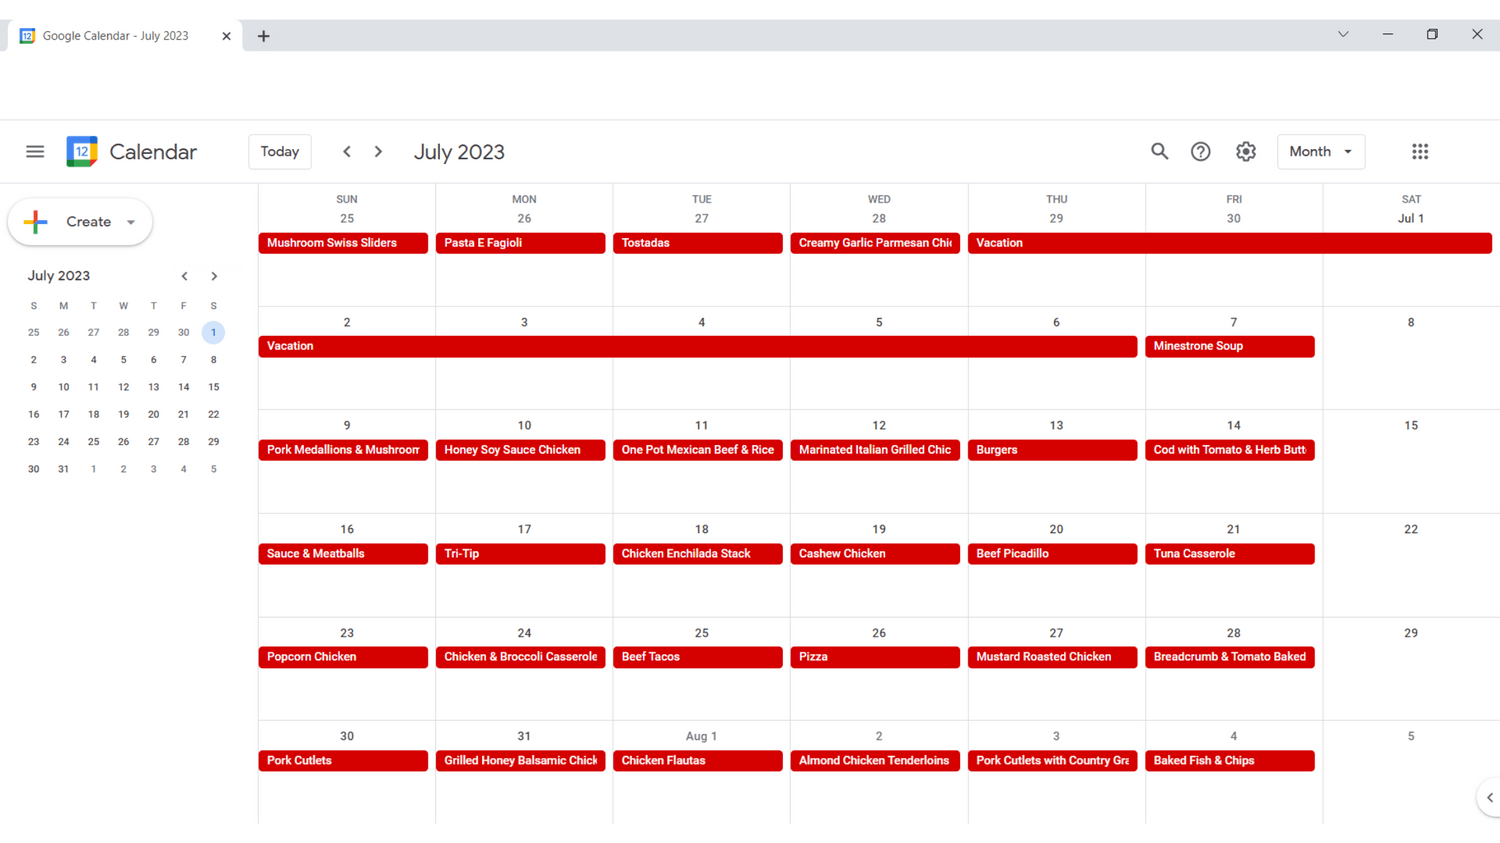 Meal Planning Google Calendar example from Rooms Need Love